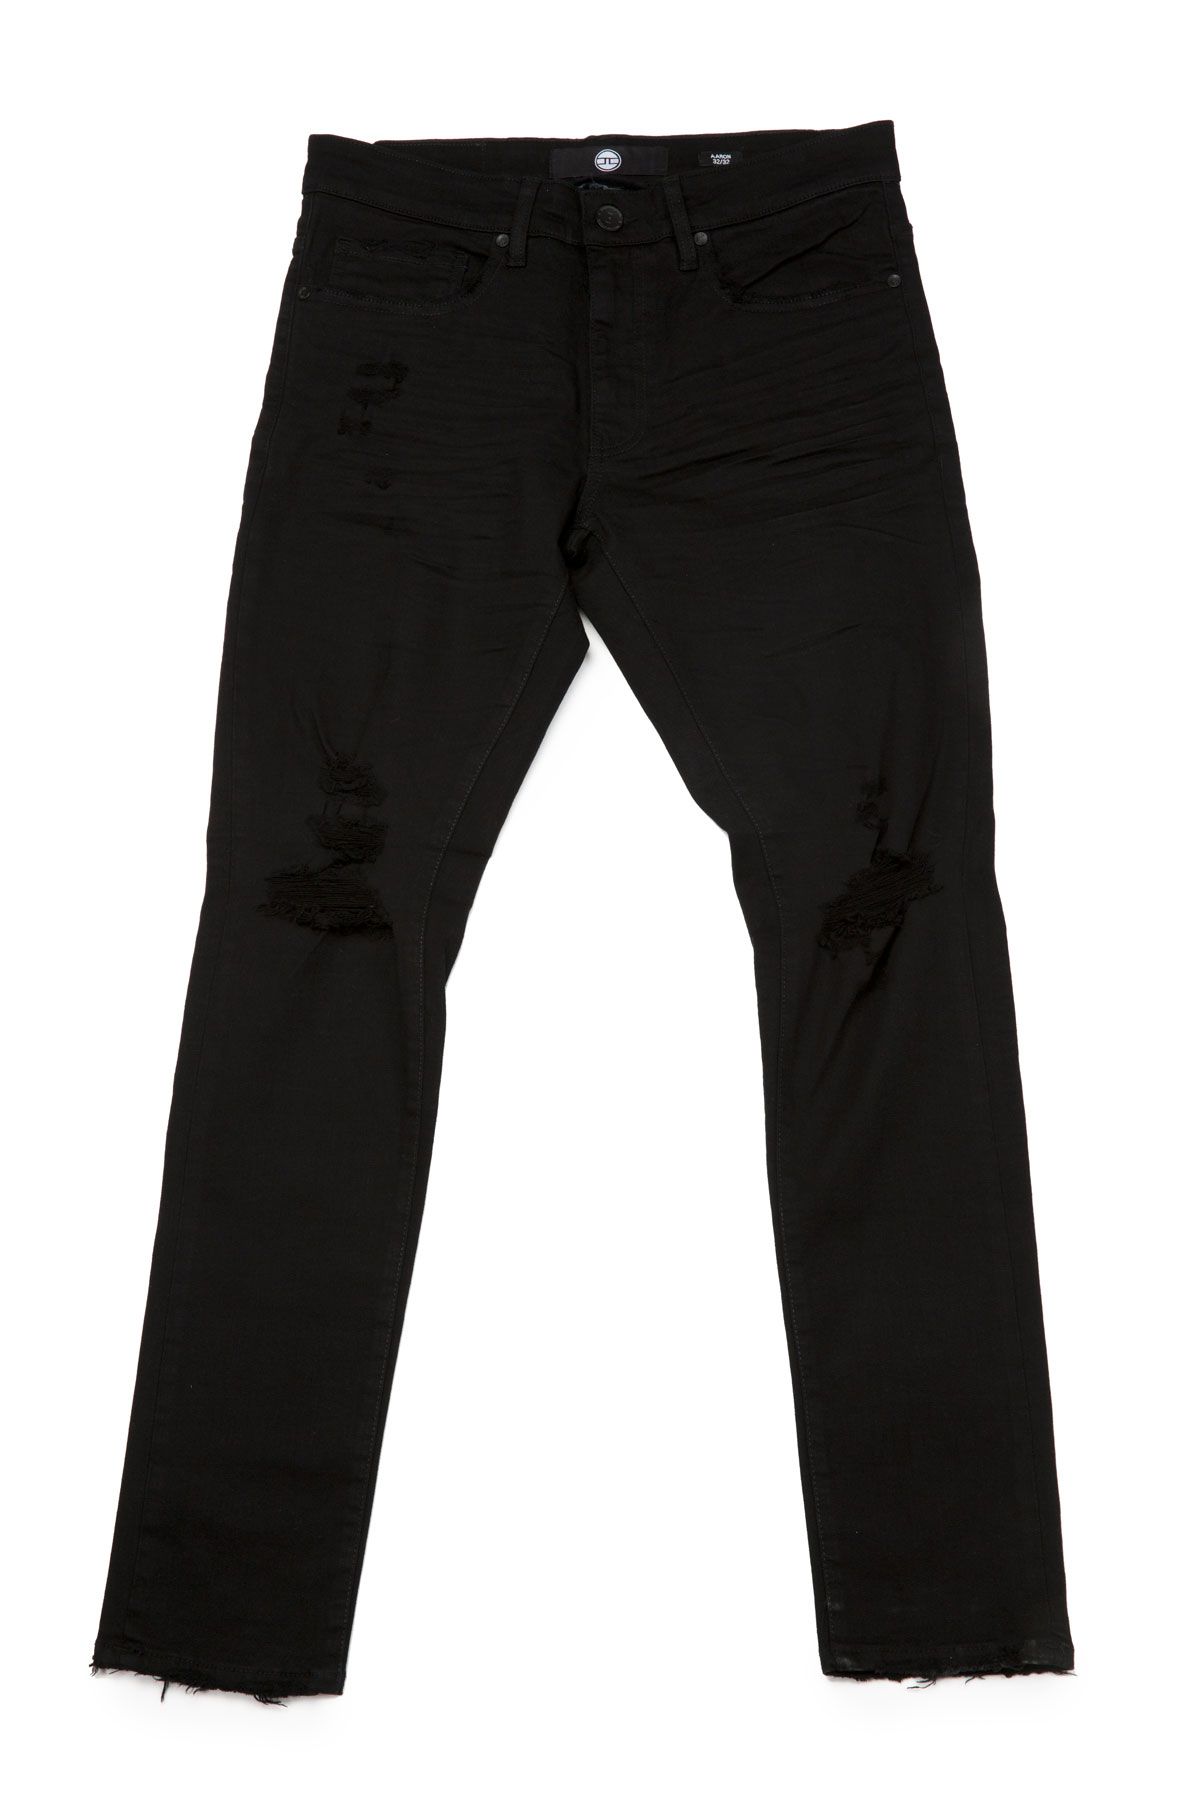 BRIAN BROTHERS INC. Aaron Distressed Jeans JM3410-BLK - Shiekh